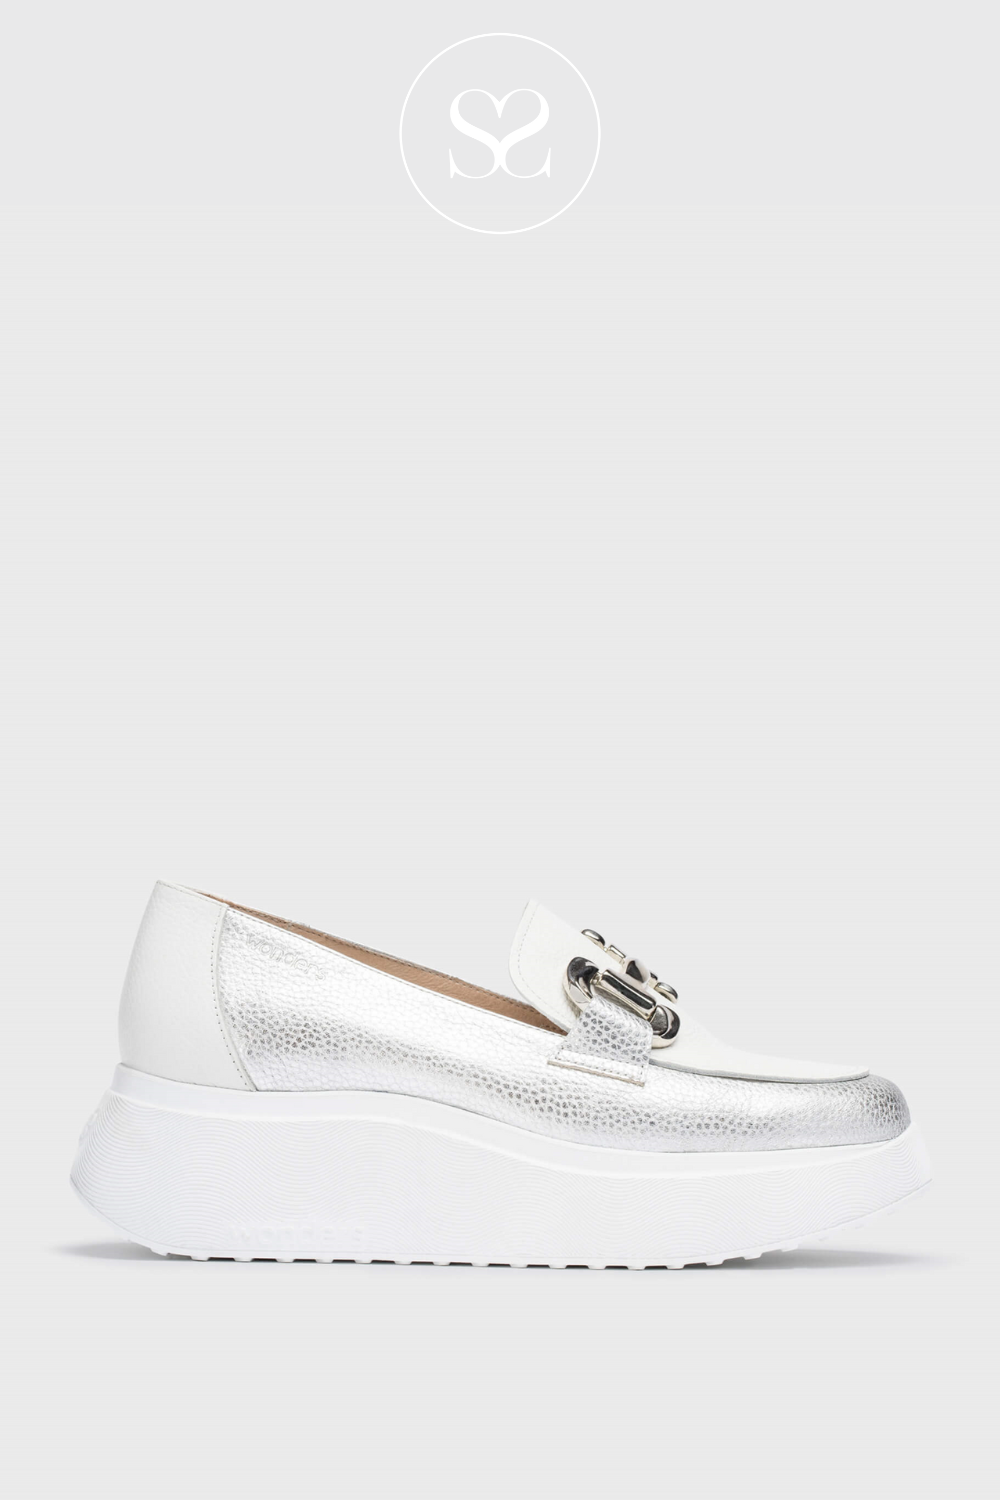 WONDERS A-3604 SILVER WEDGE FLATFORM WHITE SOLE AND SILVER BUCKLE